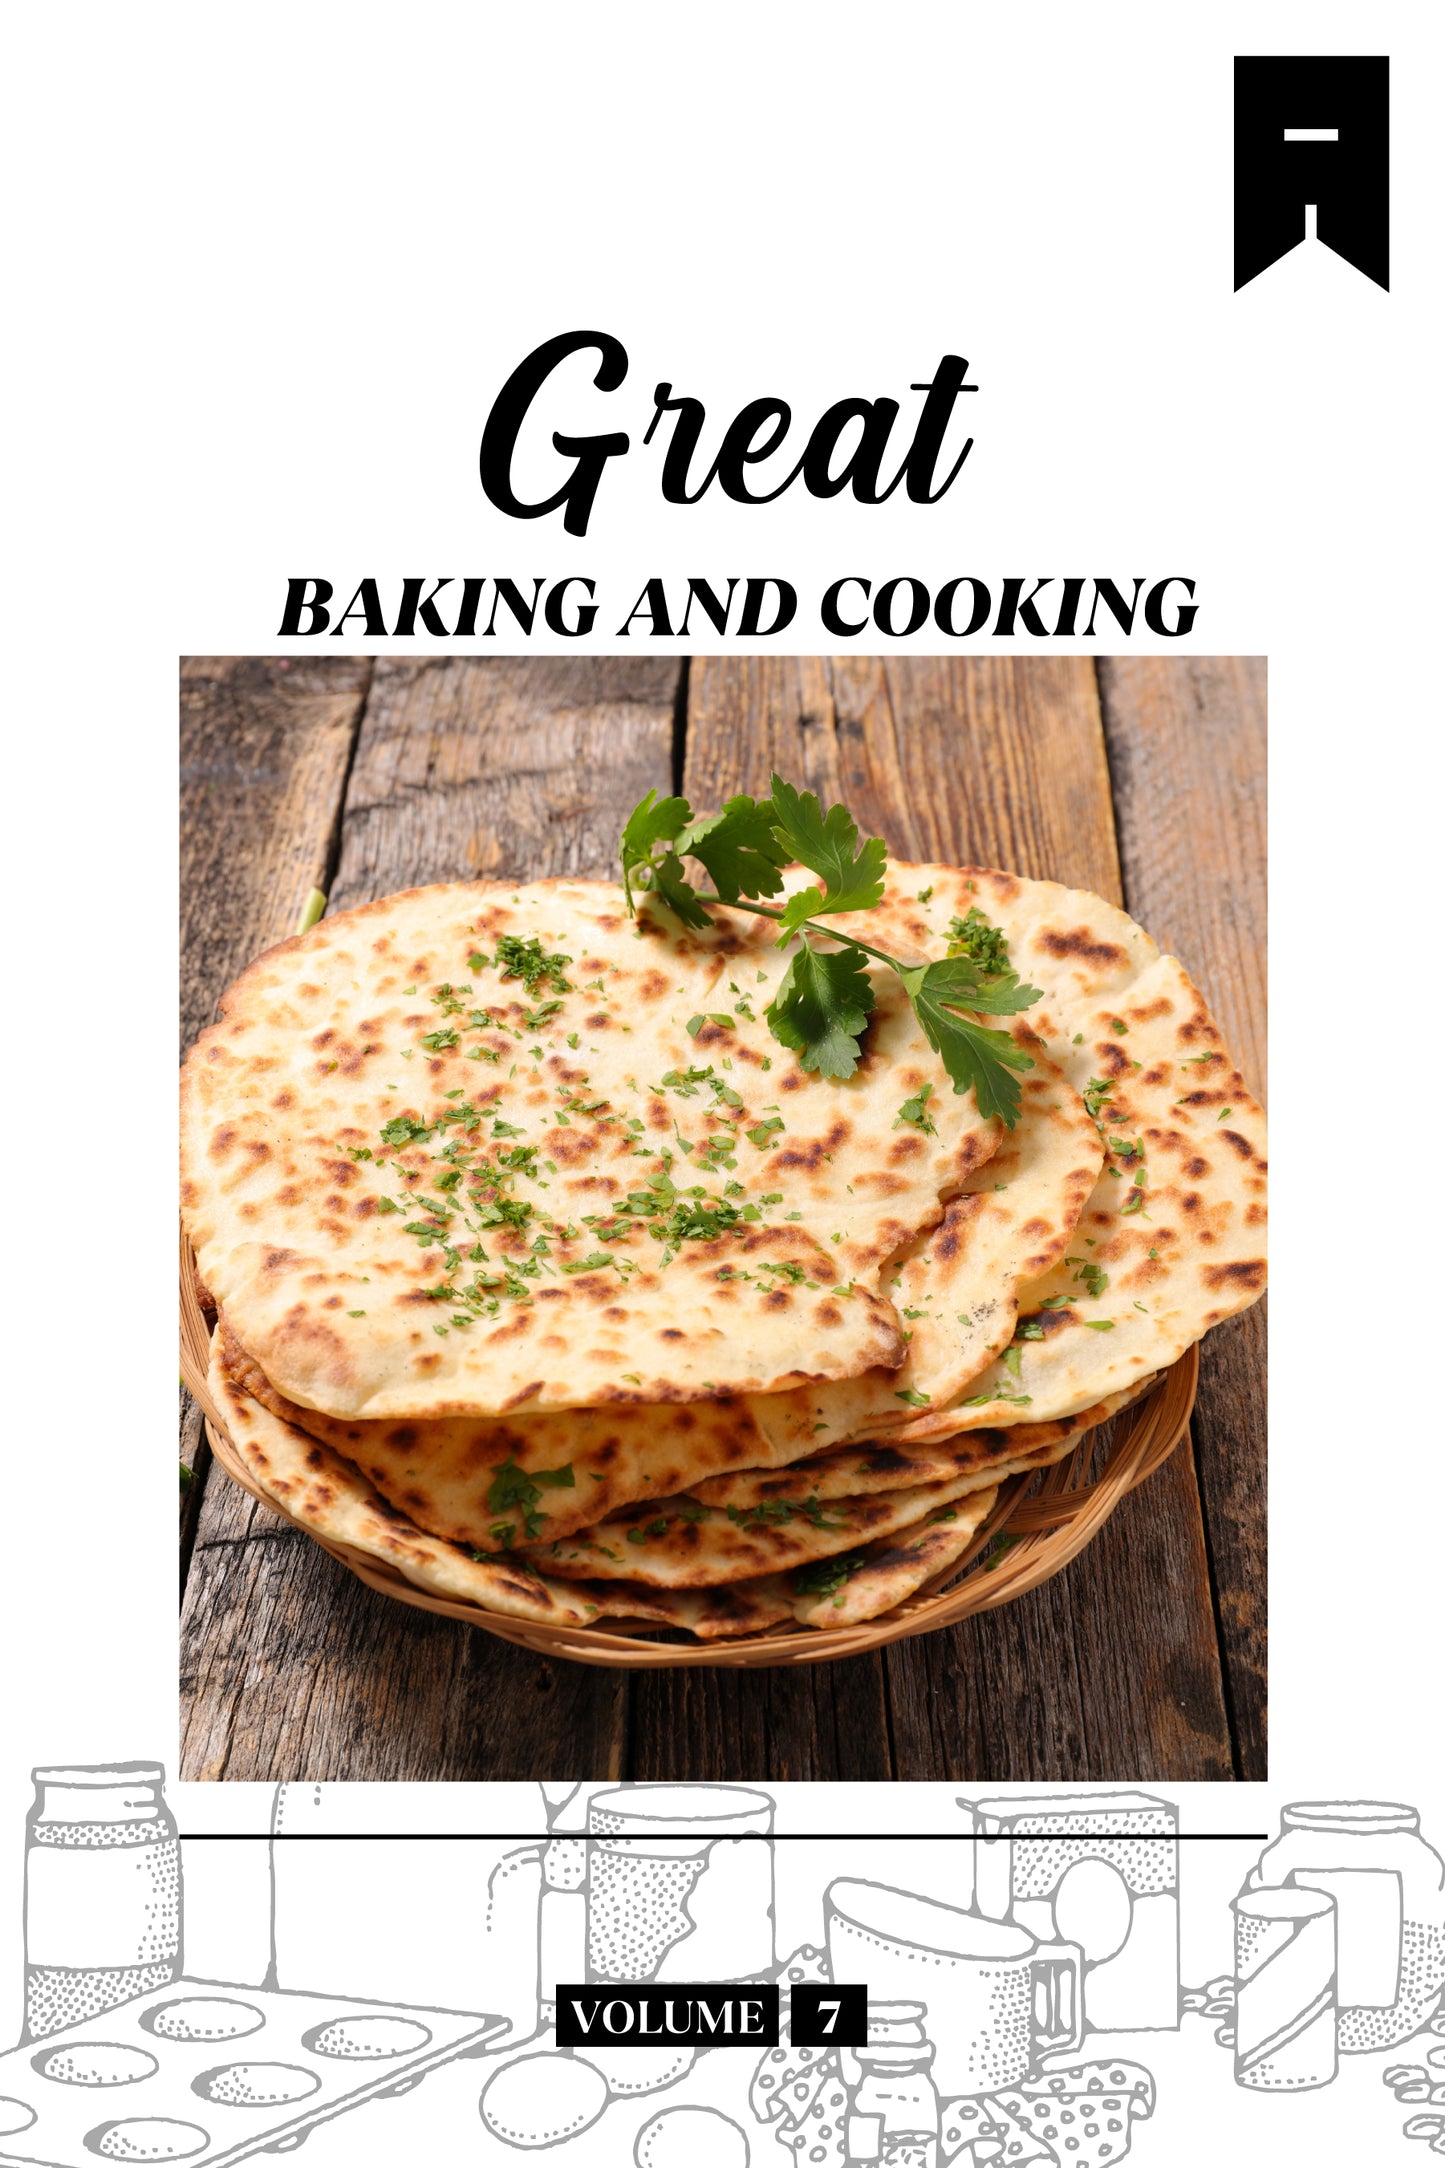 Great Baking (Volume 7) - Physical Book